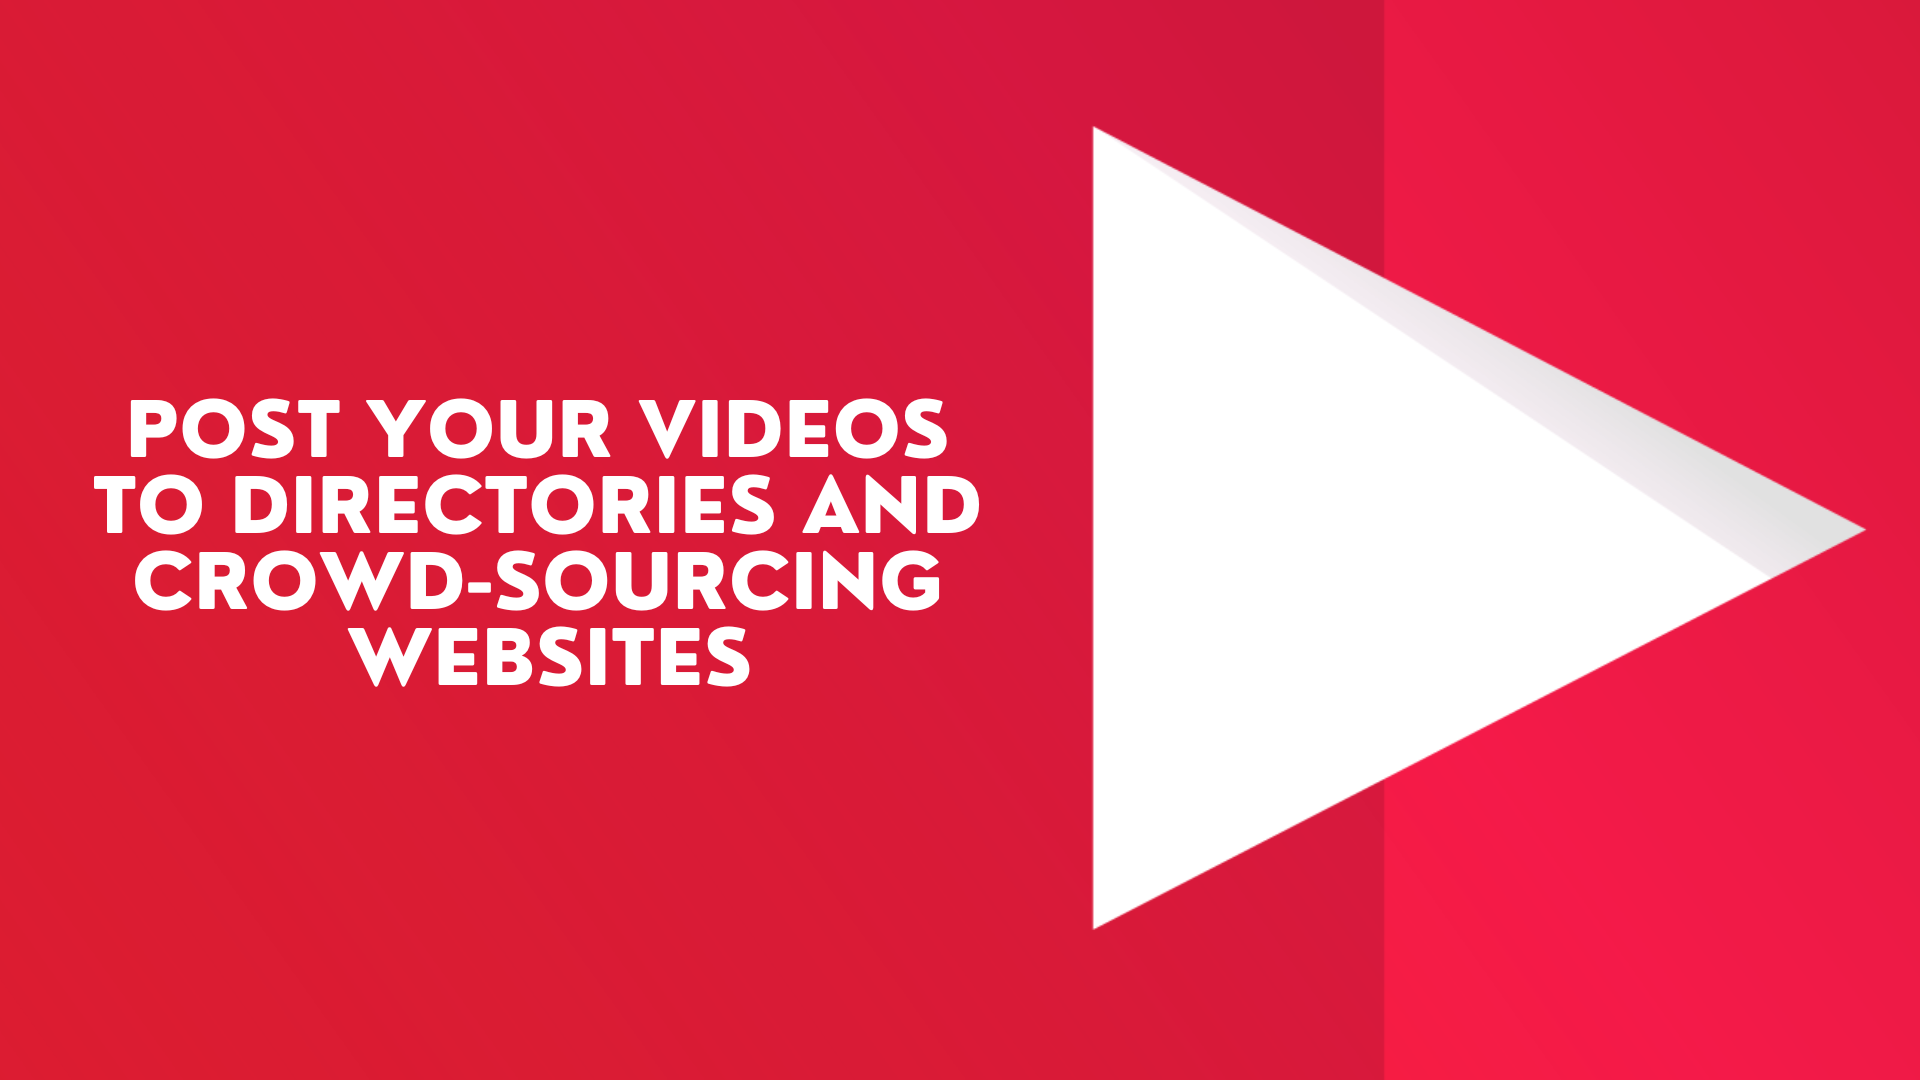 post your videos to directories and crowd-sourcing websites - Tips to Make Your YouTube Videos Go Viral